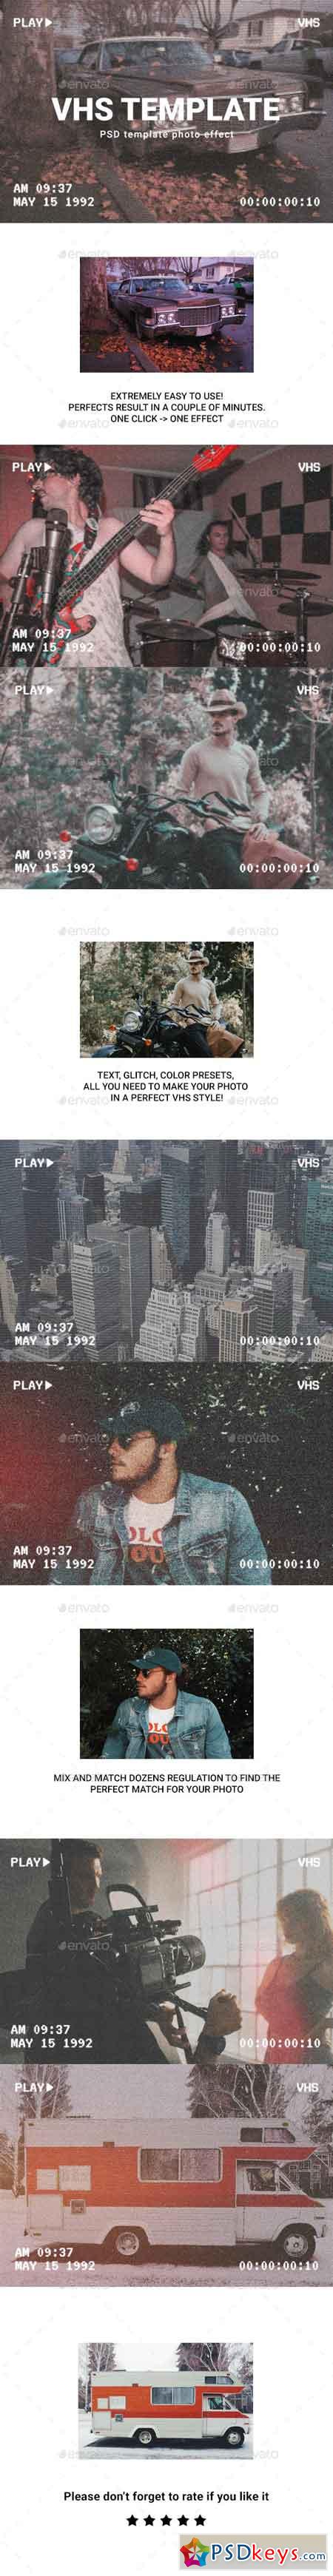 Vhs photo template 23025784